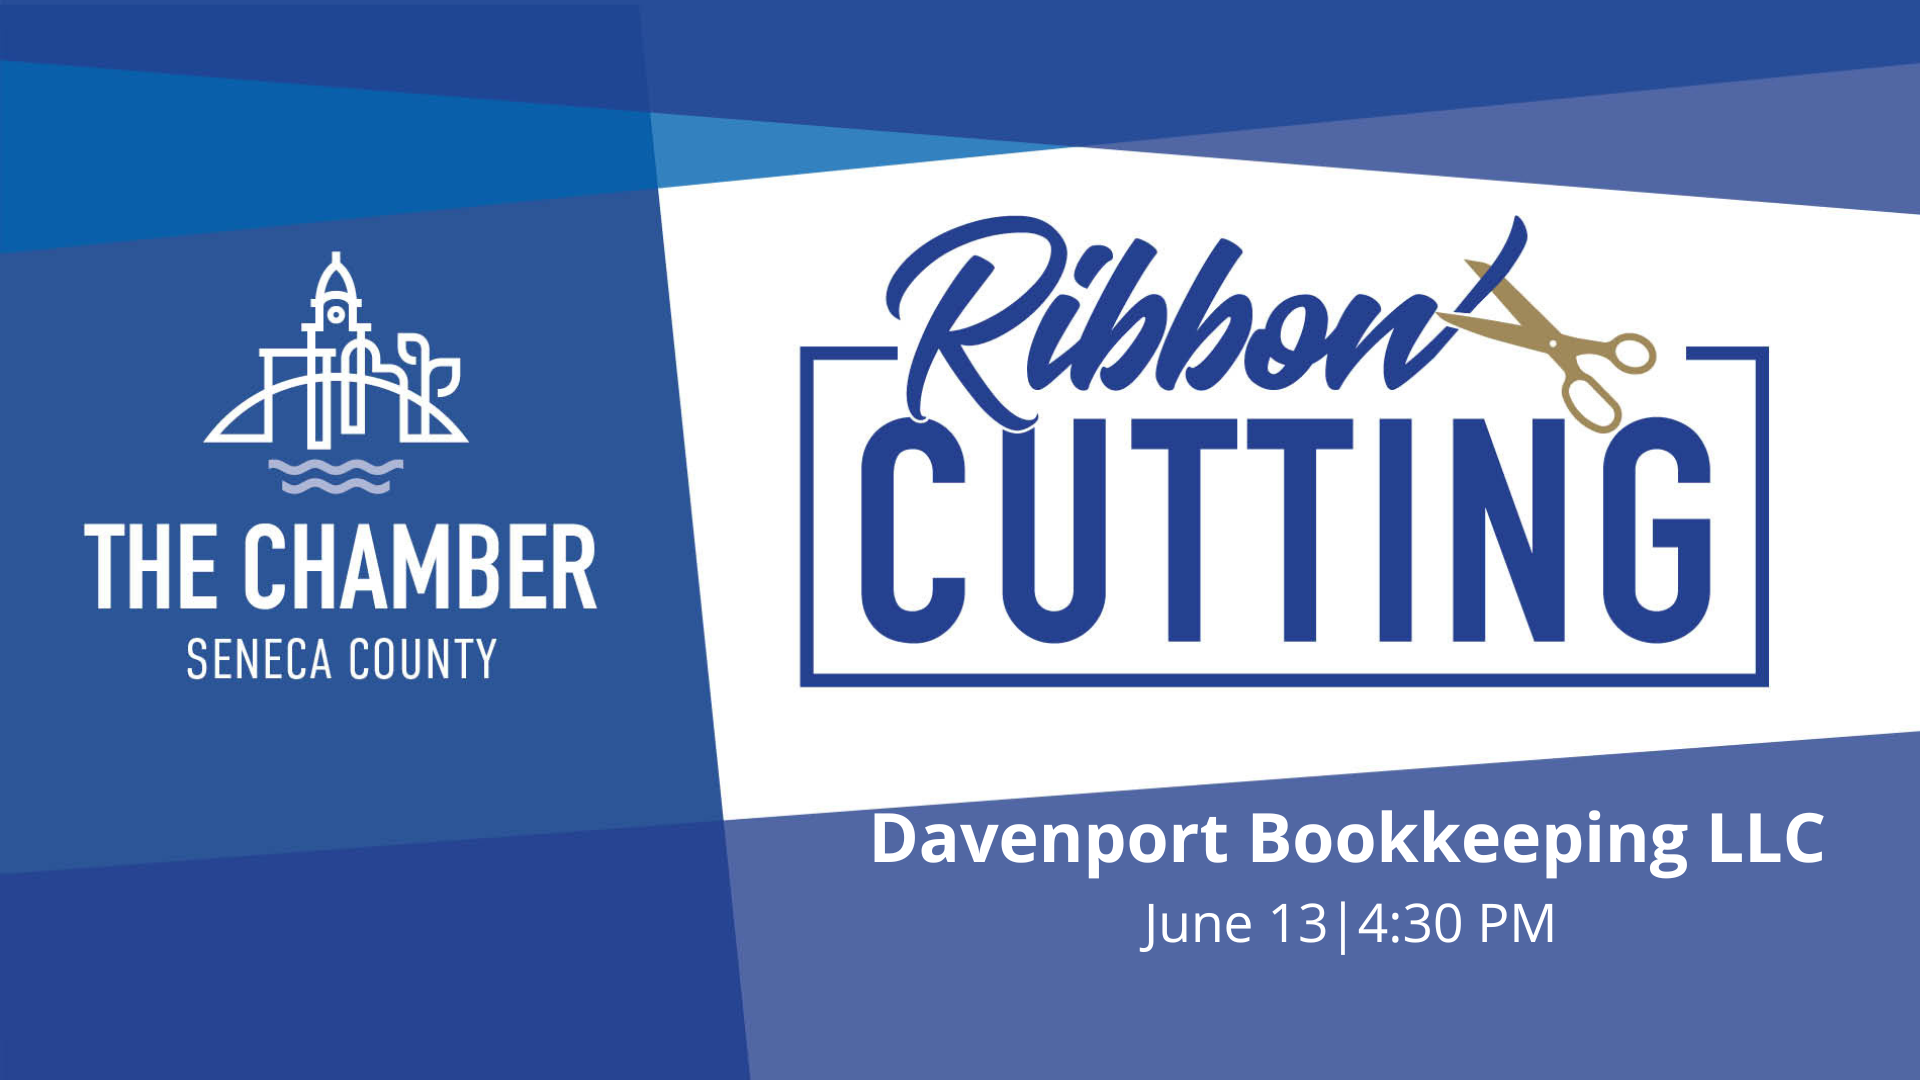 Davenport Bookkeeping, LLC to Cut Ribbon on New Office